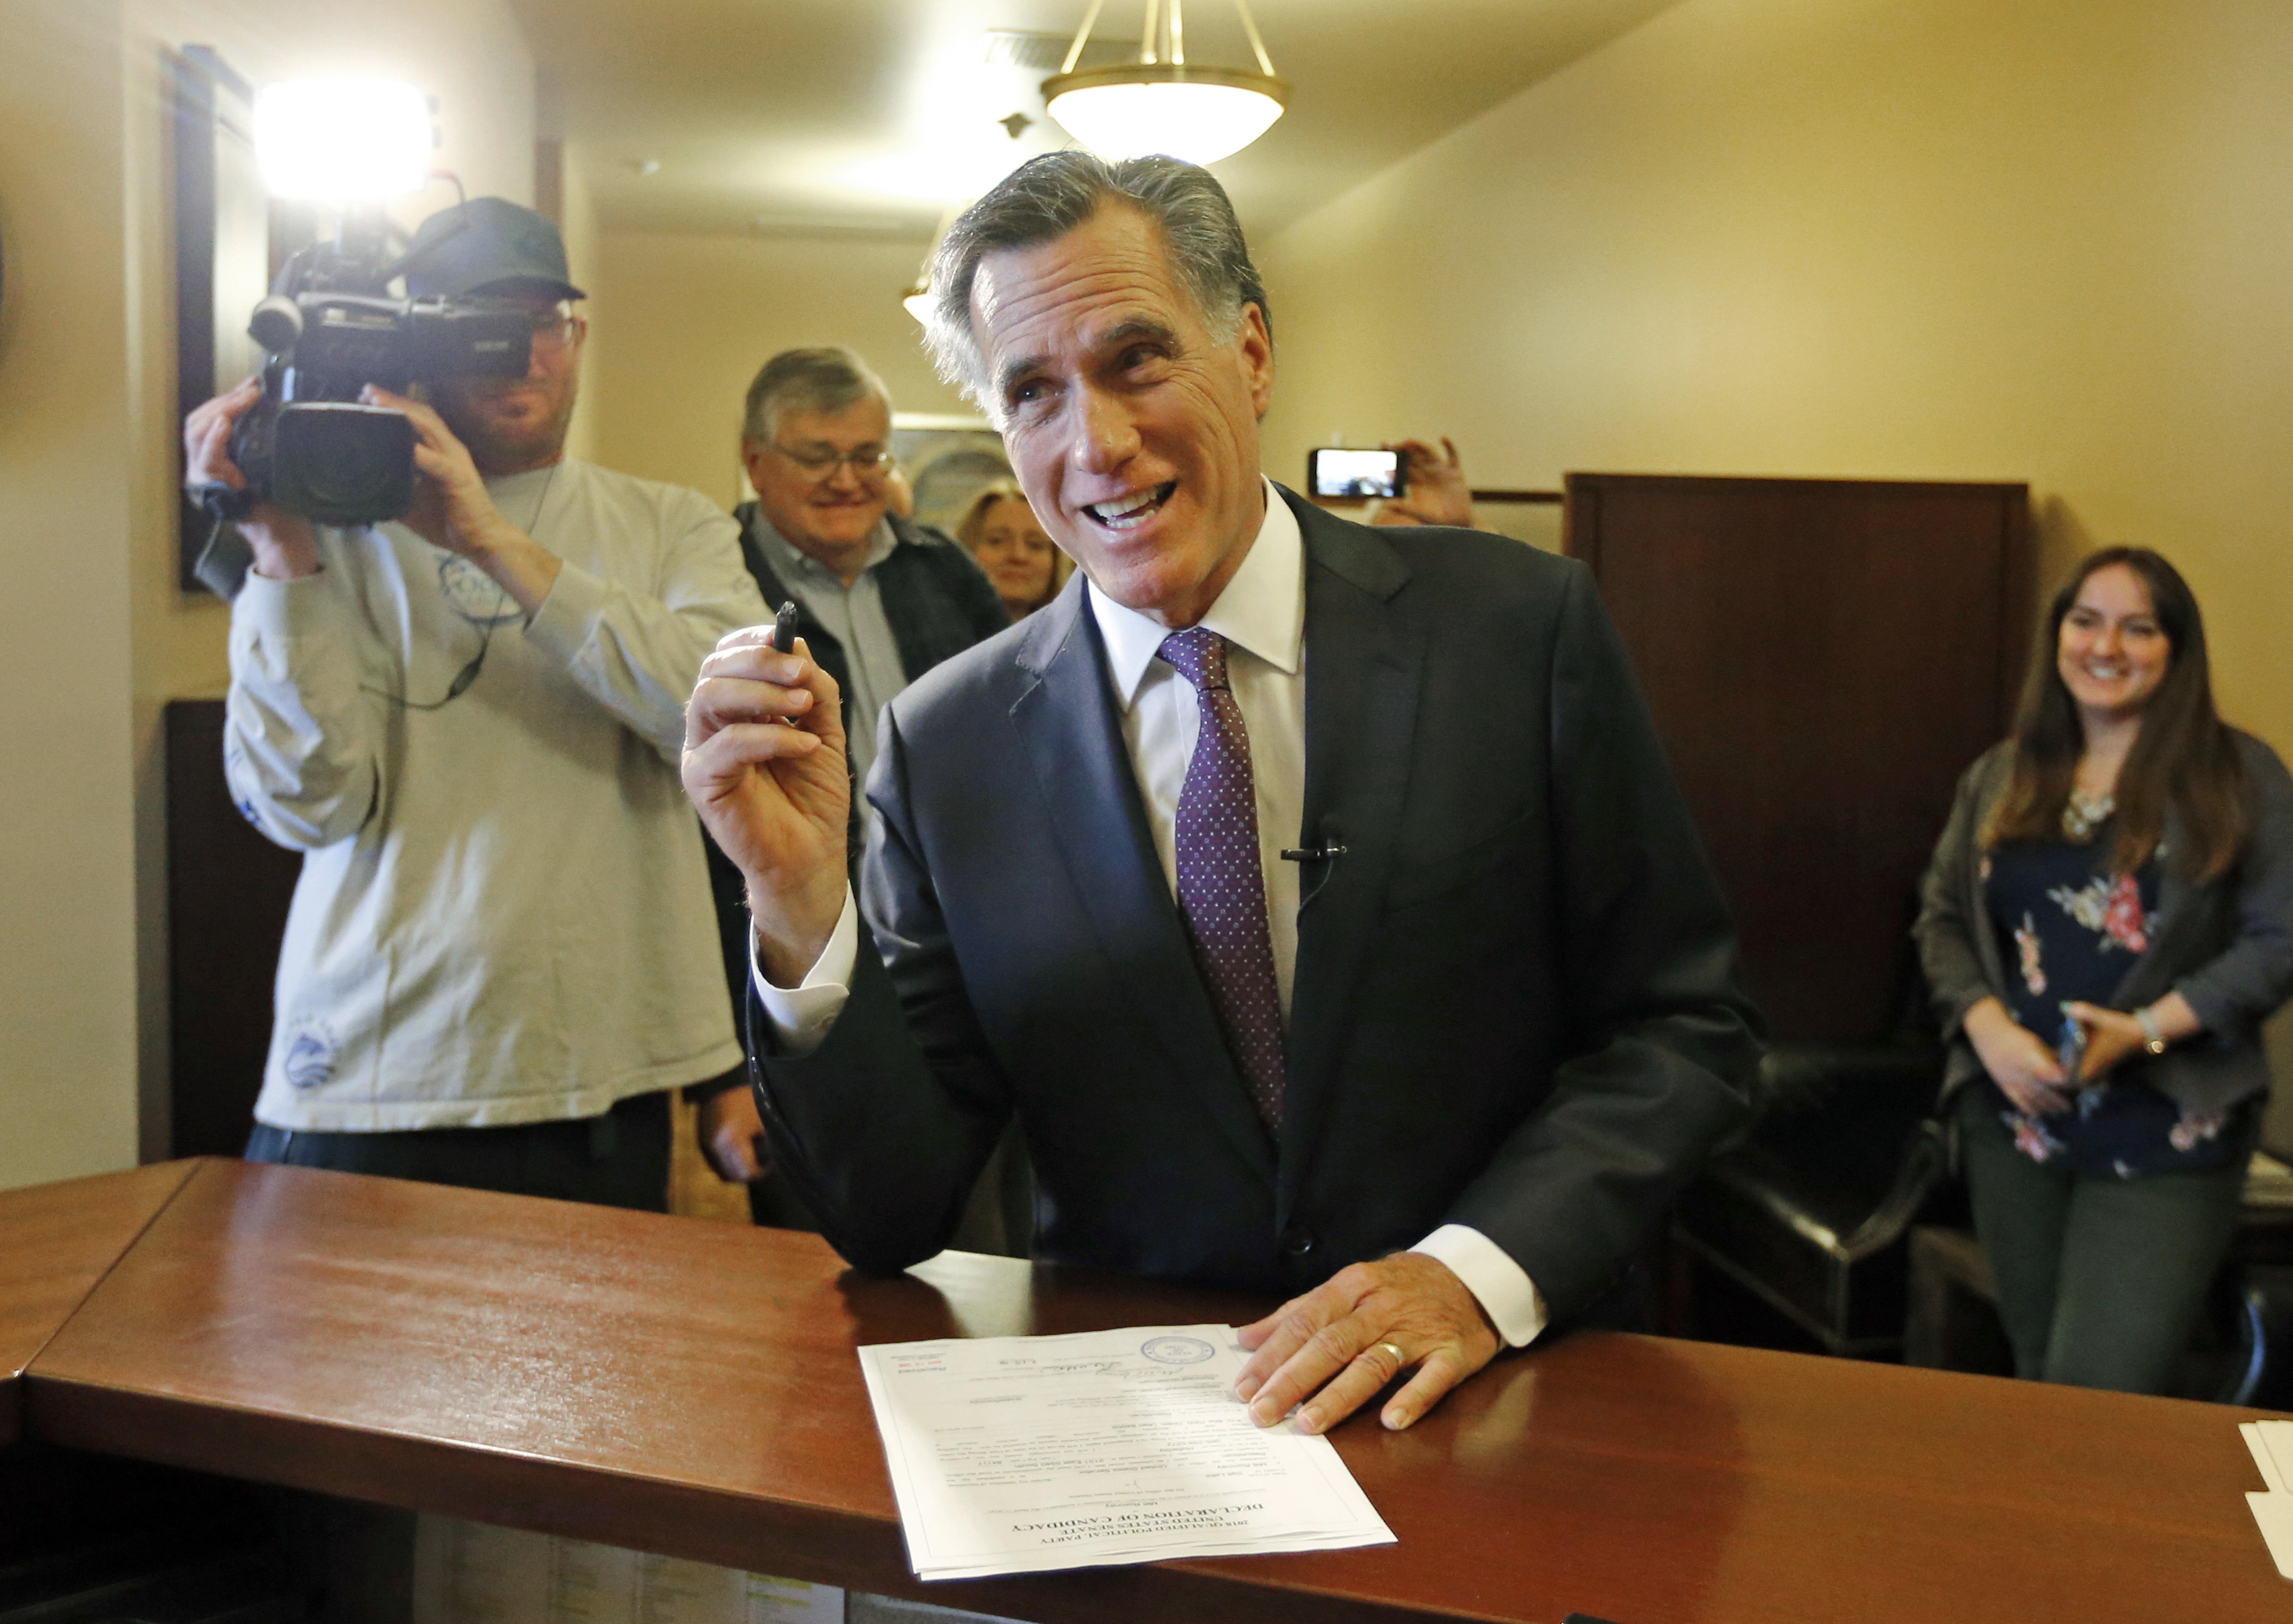 Mitt Romney comes in second place at Utah GOP convention, forced into primary - CBS News